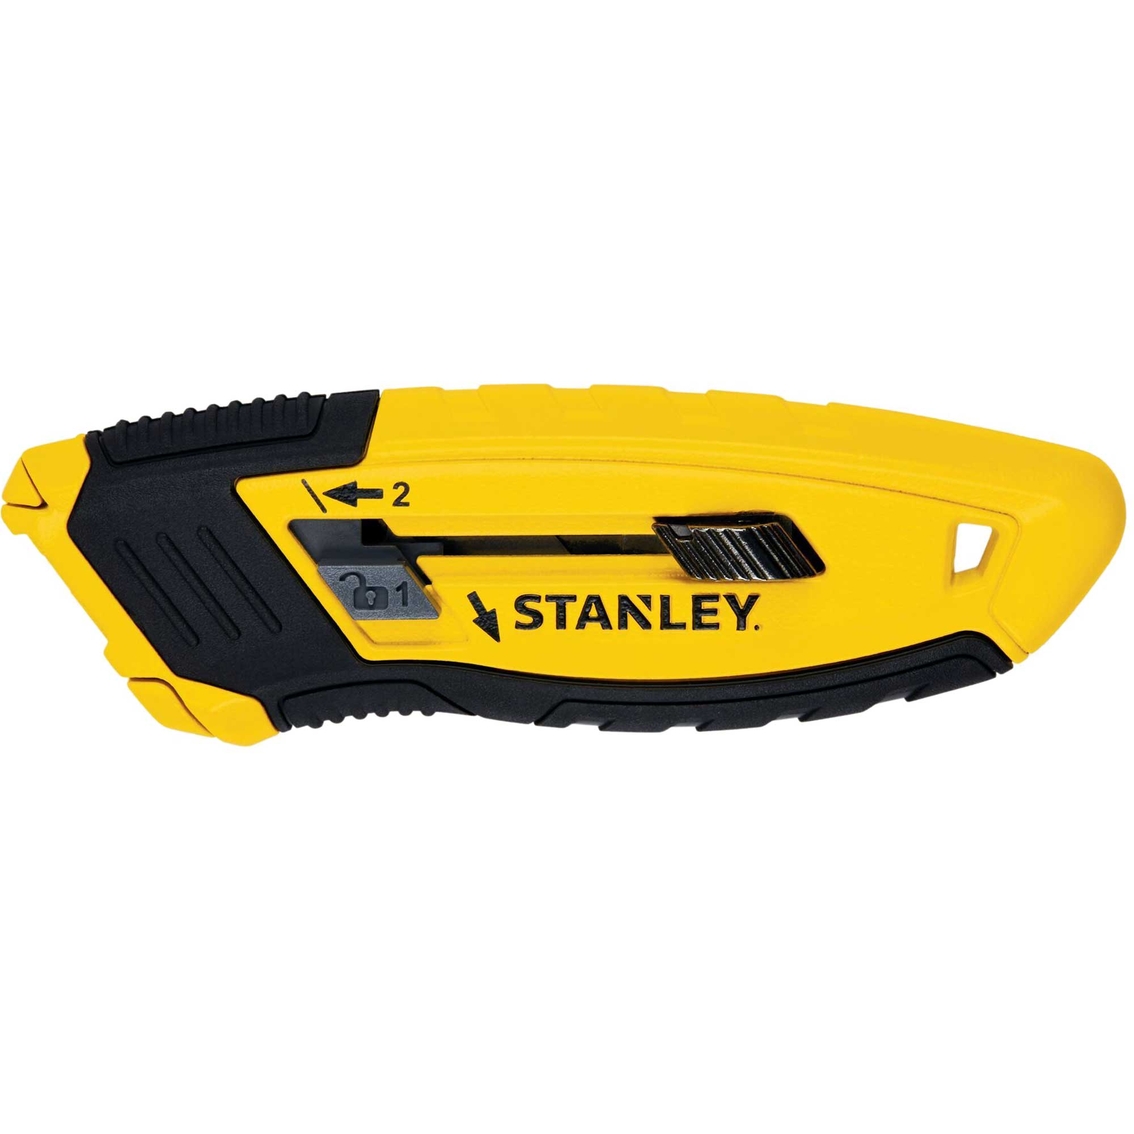 Stanley Control Grip Retractable Utility Knife - Image 4 of 5